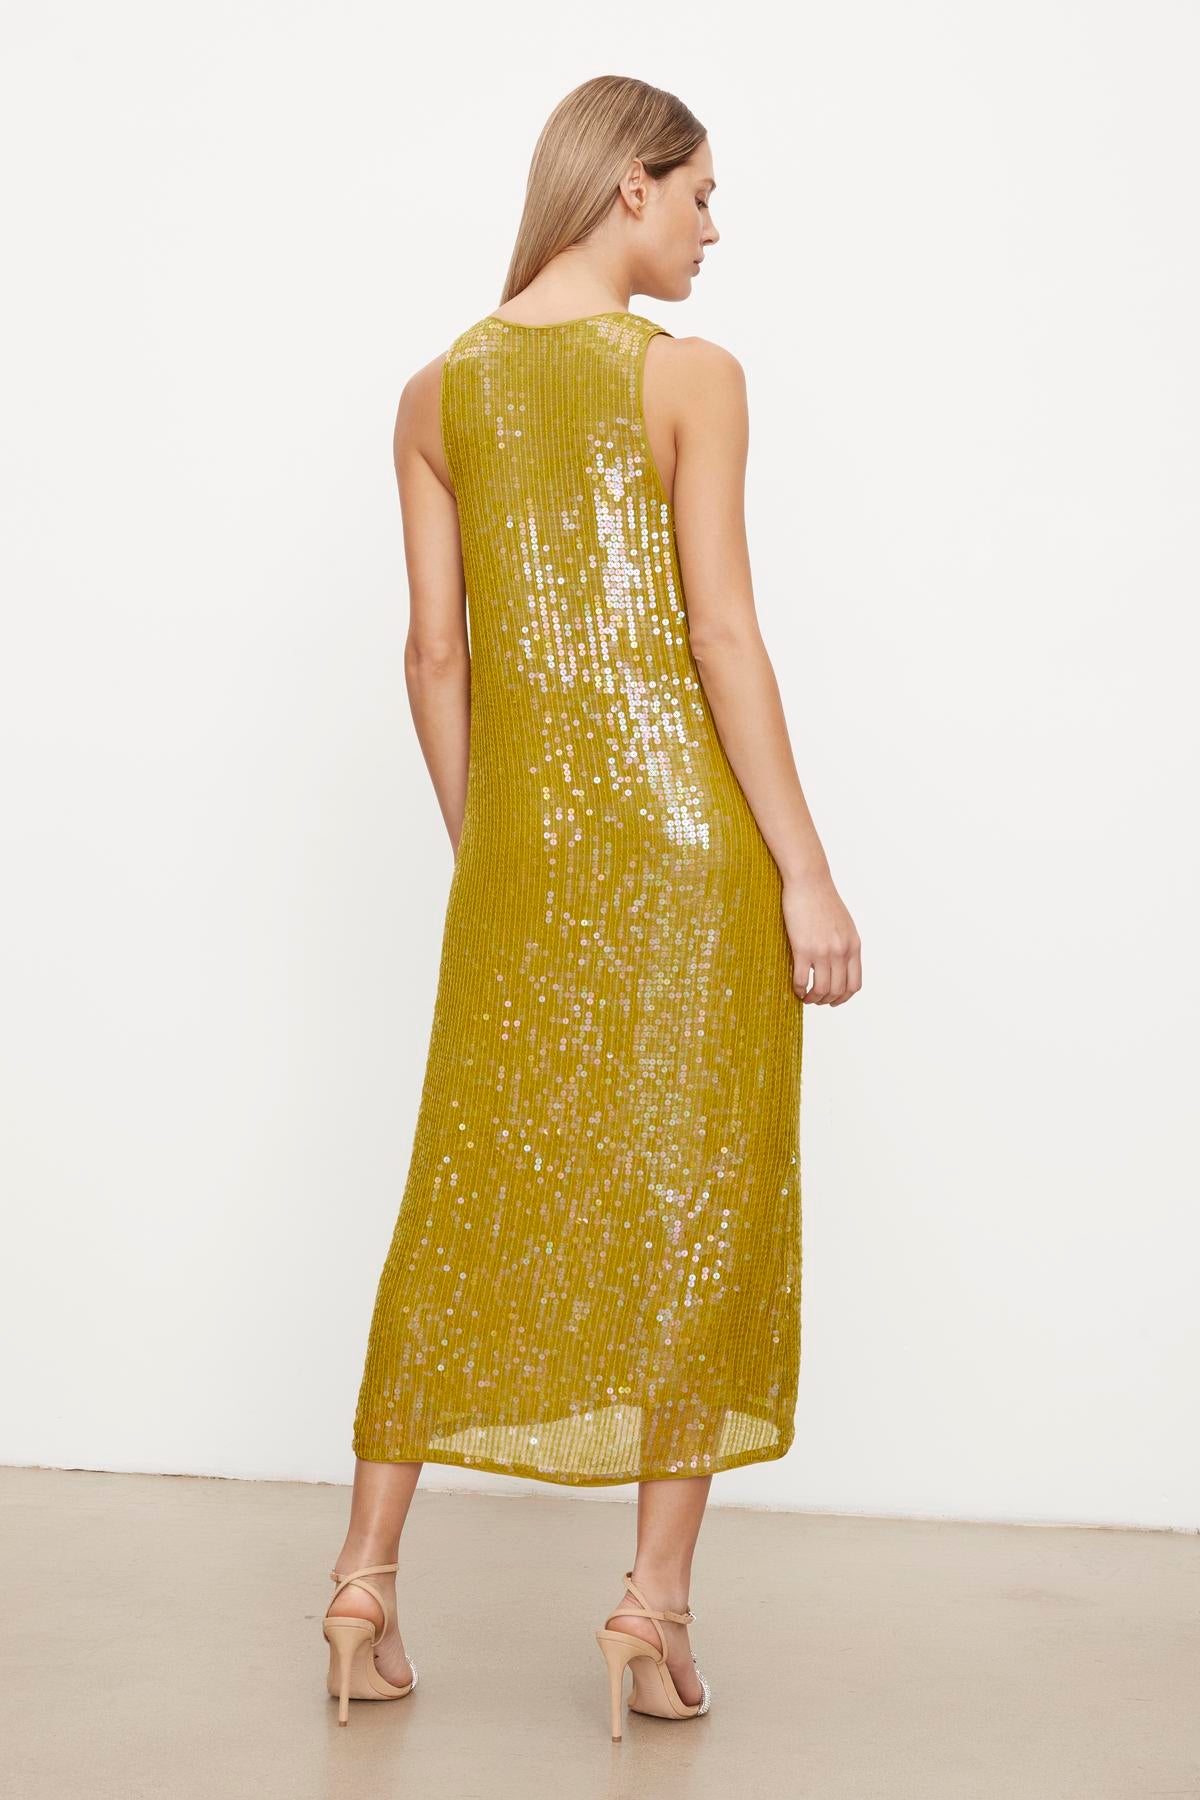   Woman modeling a sleeveless, mustard yellow Velvet by Graham & Spencer ALENA SEQUIN TANK DRESS with a high neckline, viewed from the back. 